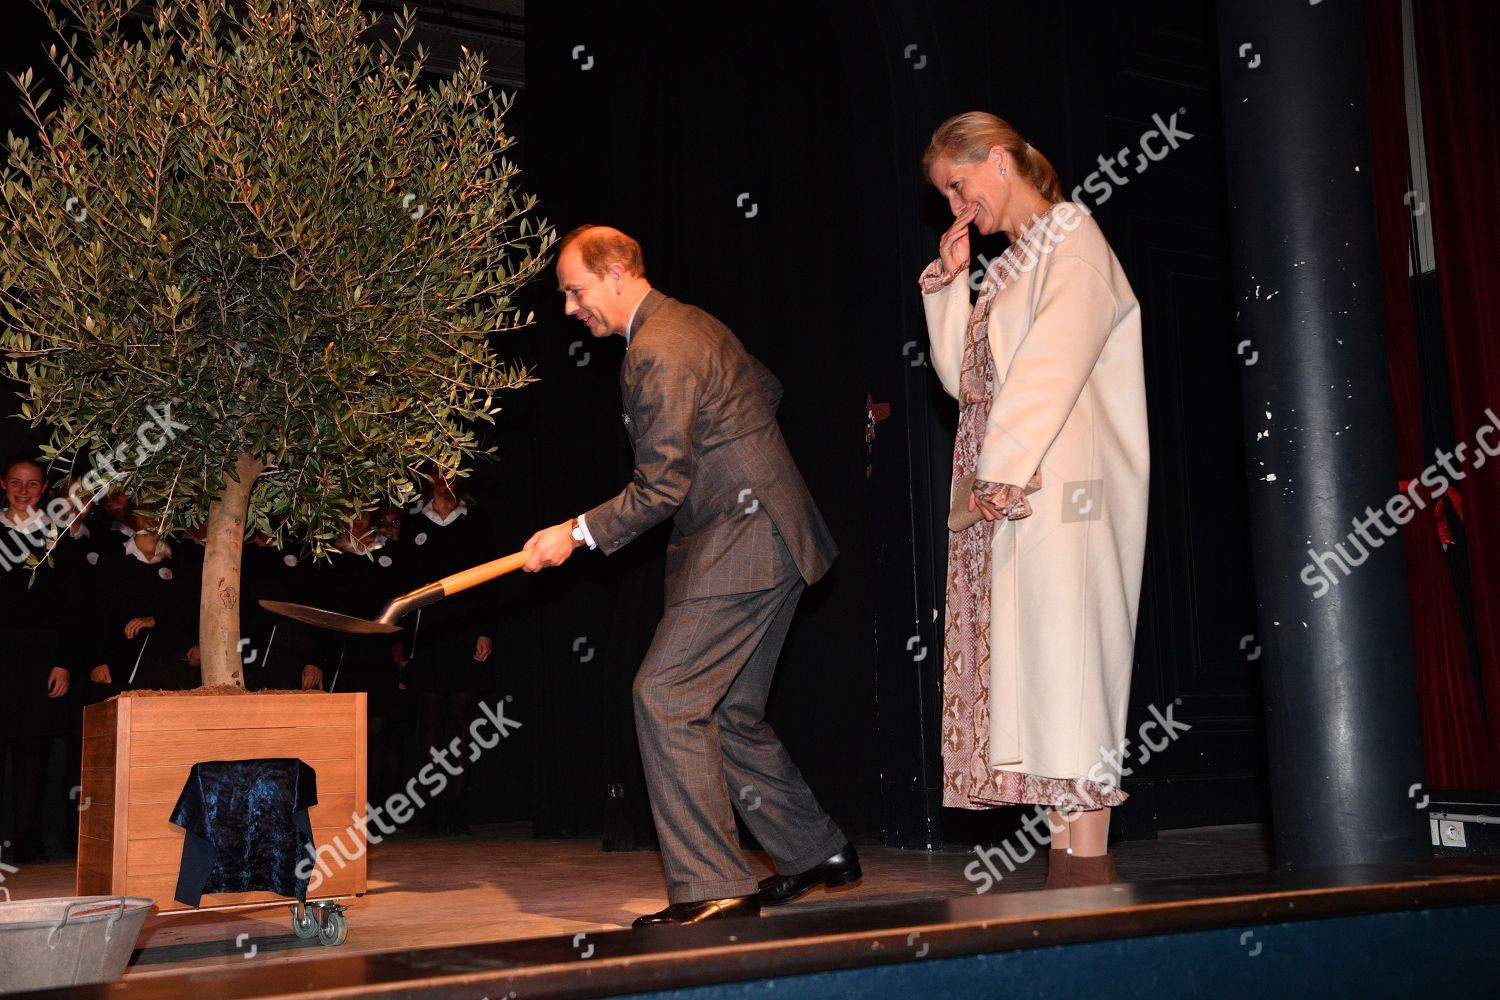 prince-edward-and-sophie-countess-of-wessex-visit-to-france-shutterstock-editorial-9907868ar.jpg